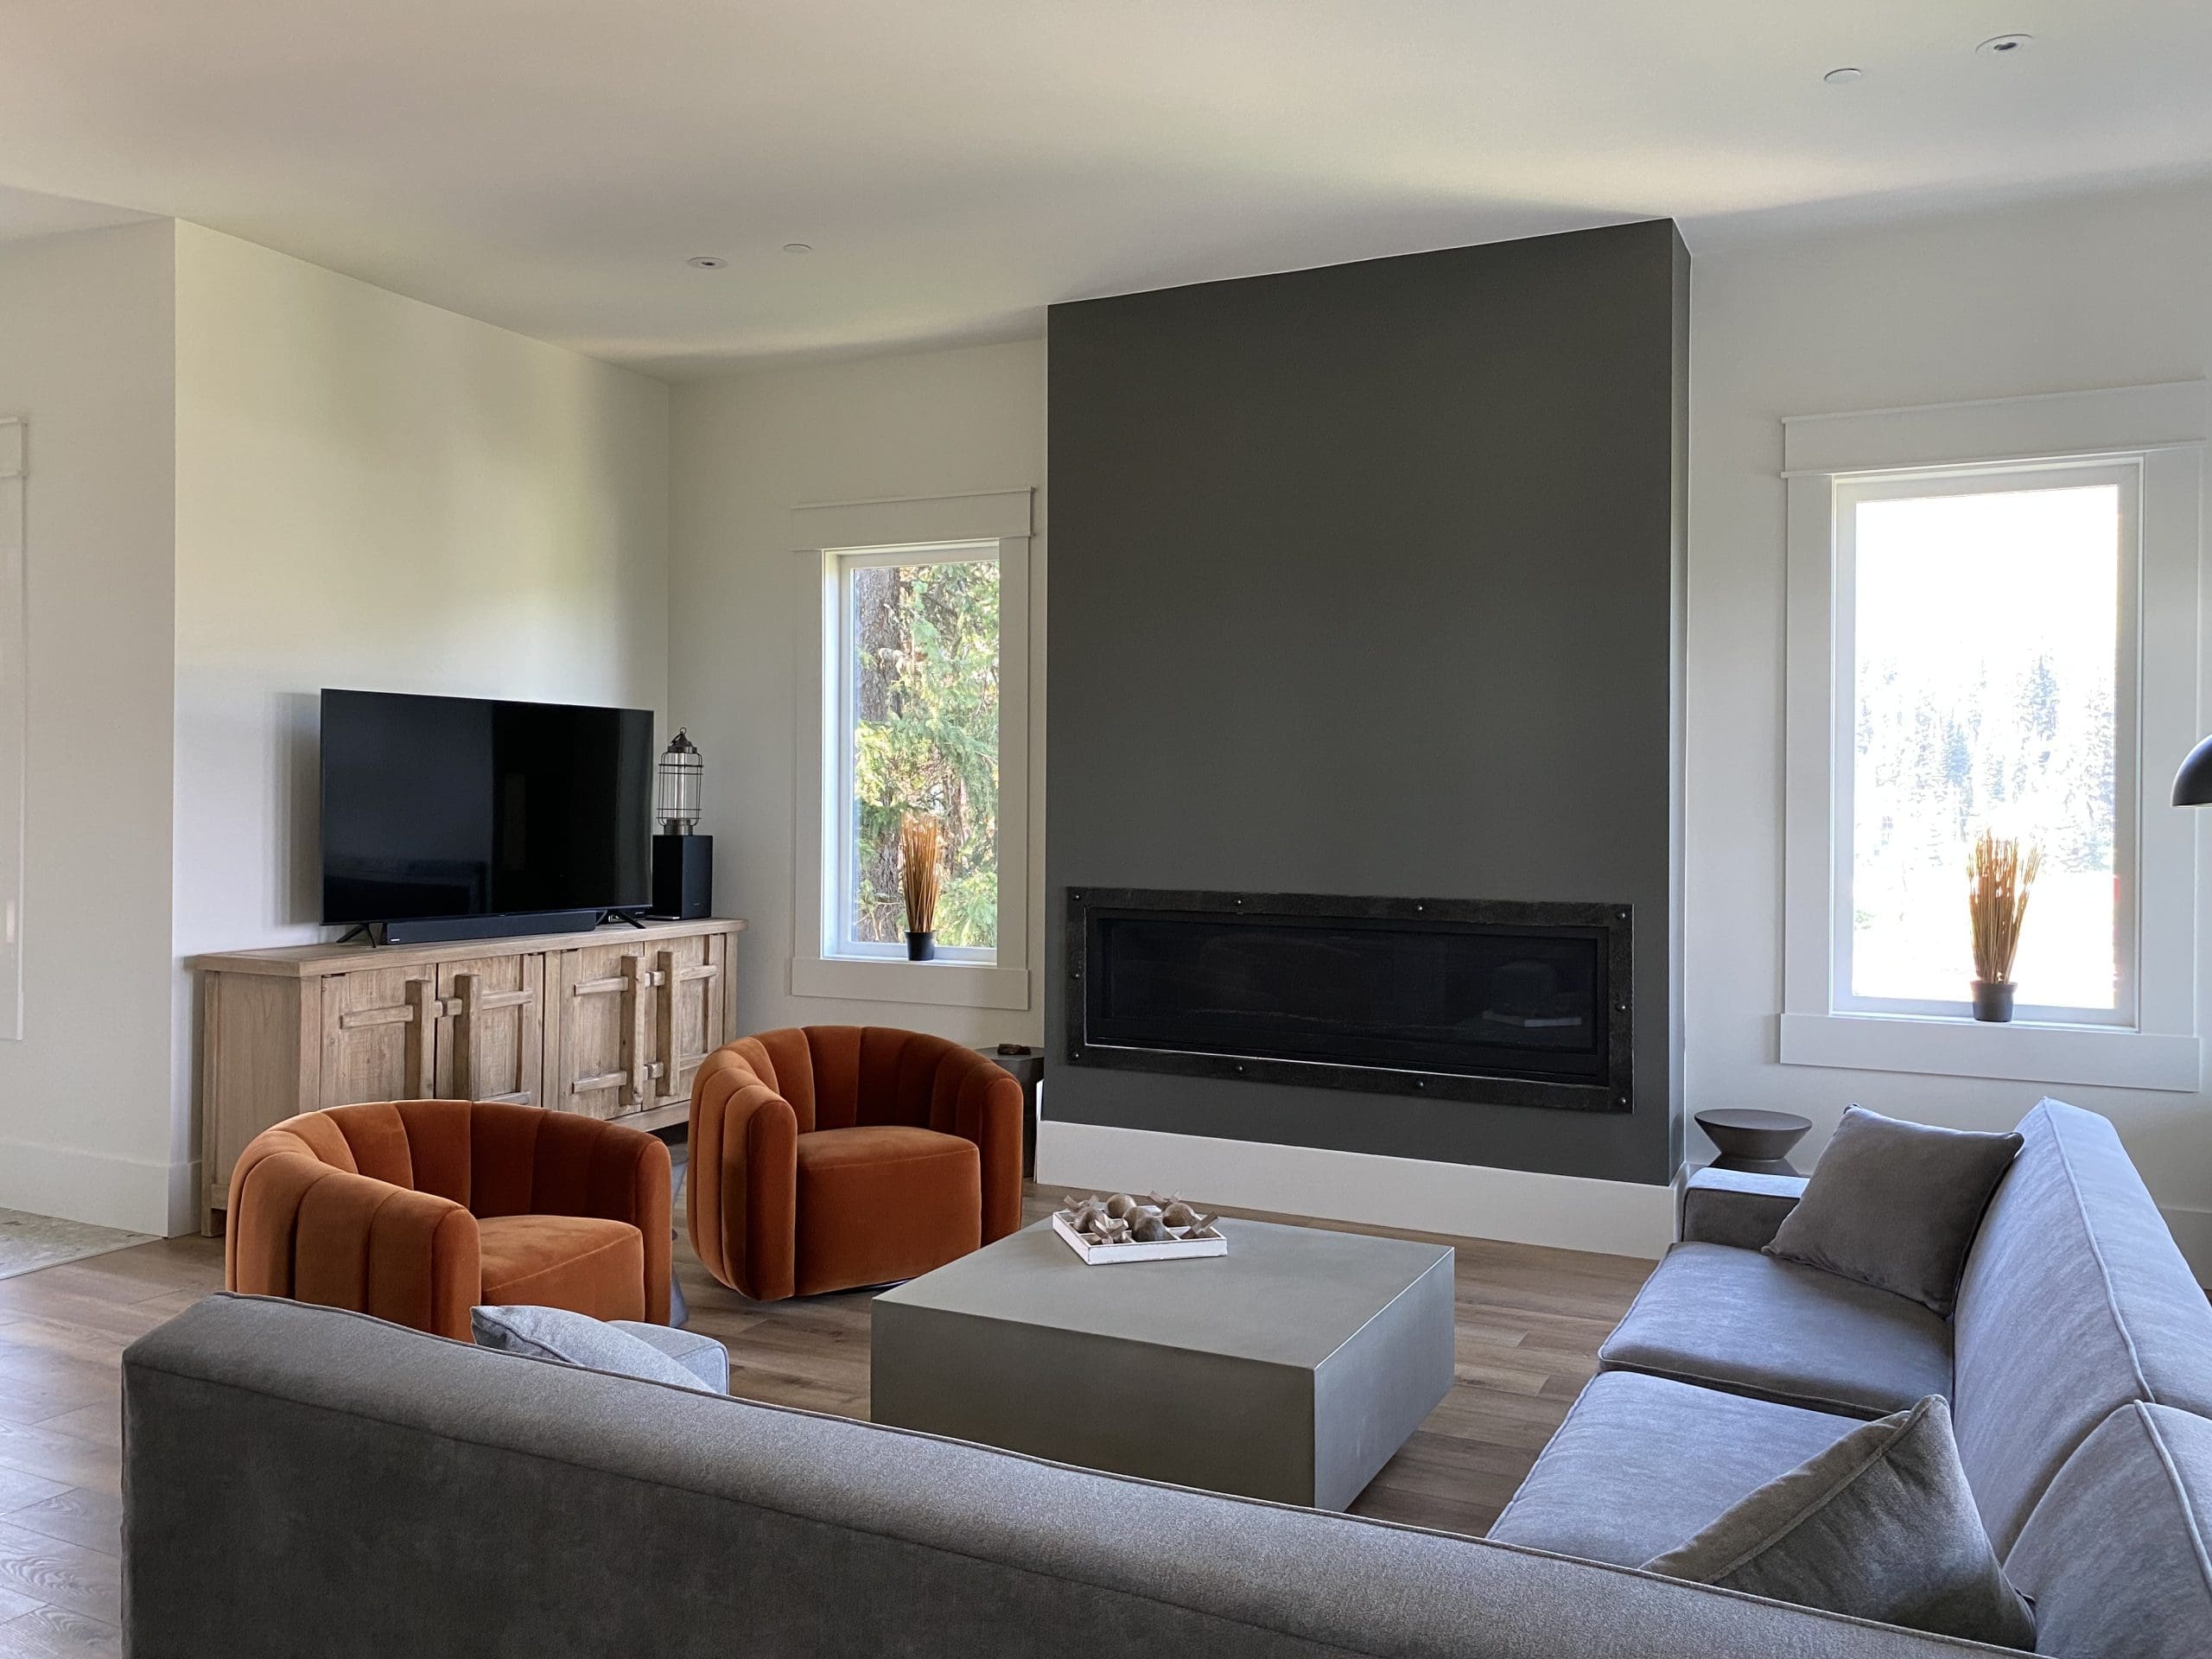 High-end modern living room with gas fireplace and bright natural light from the windows.